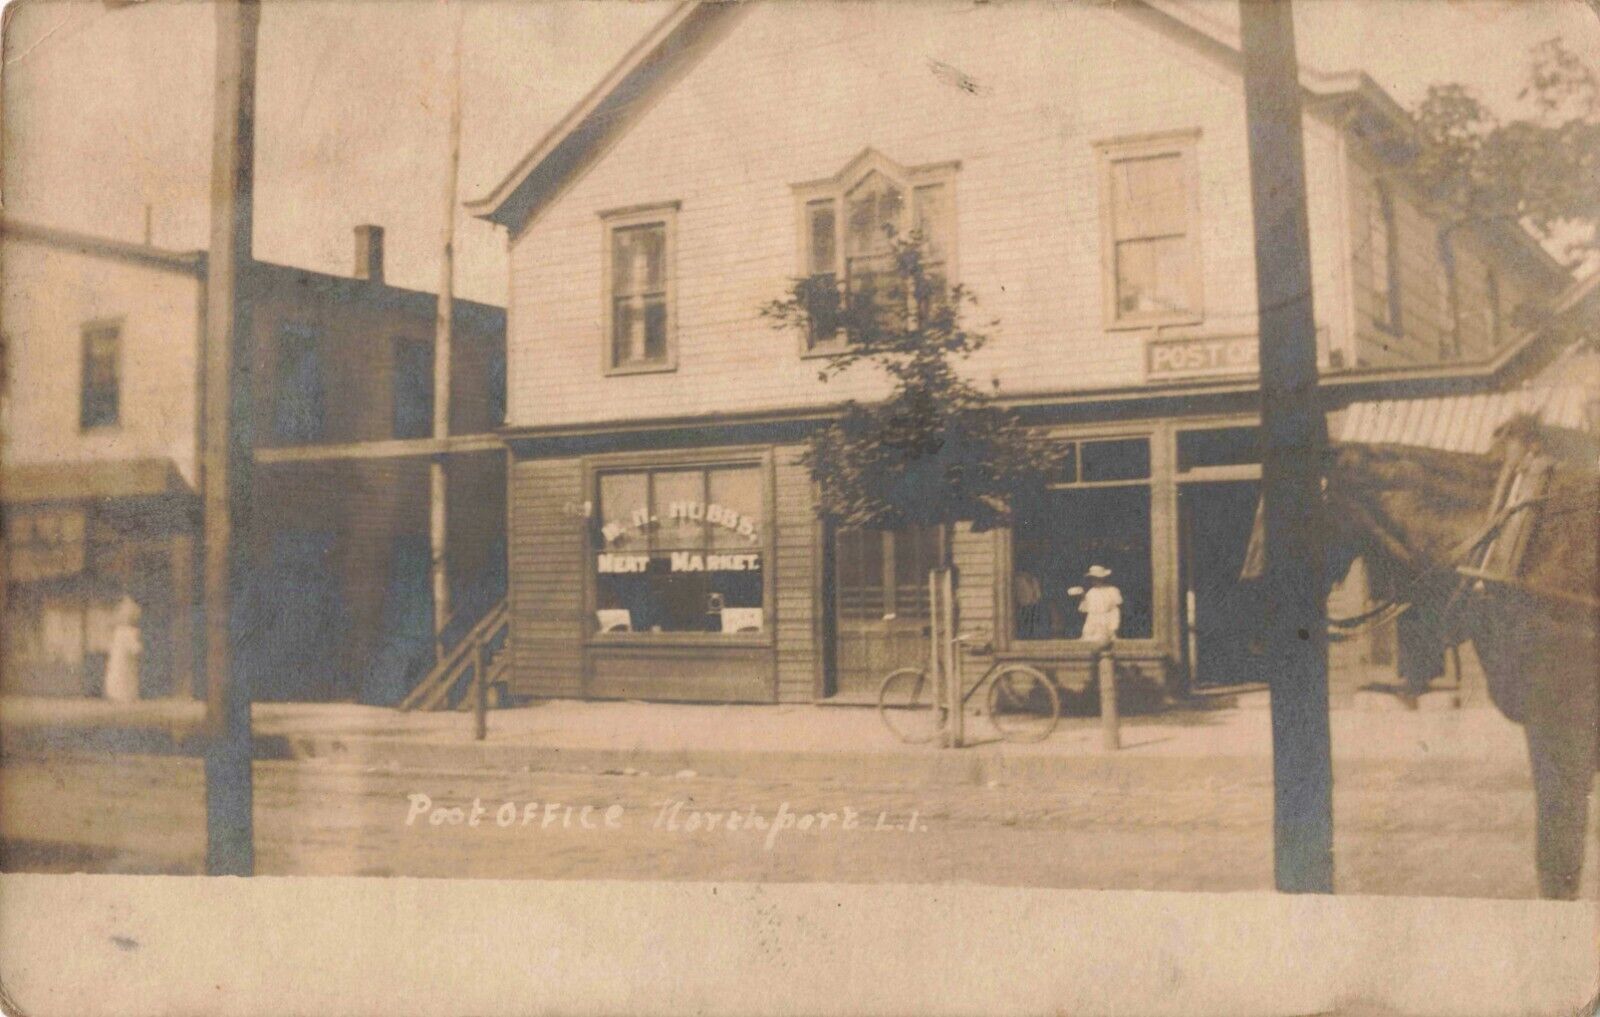 Post Office Meat Market Northport Long Island New York c1906 Real Photo RPPC